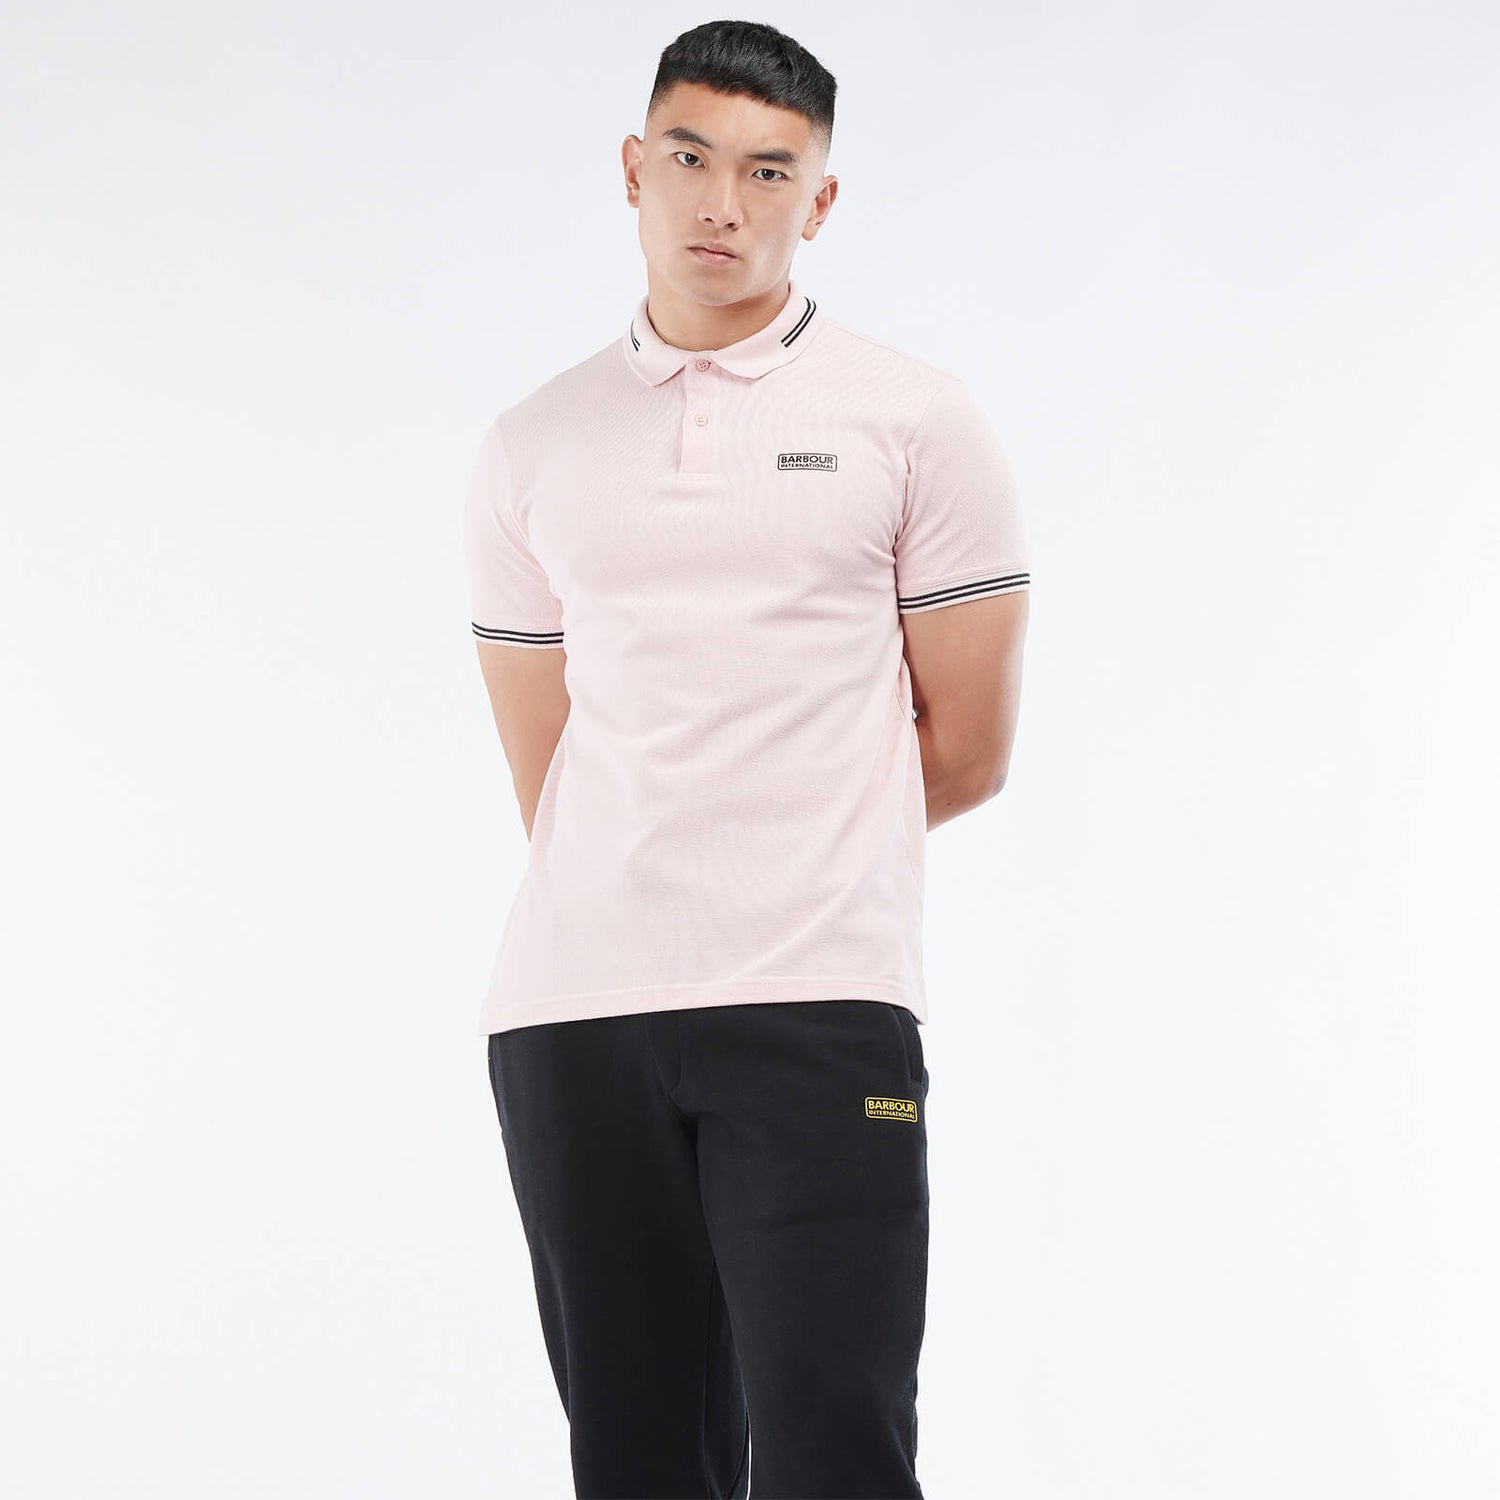 Barbour International Men's Essential Tipped Polo Shirt - Pink Cinder